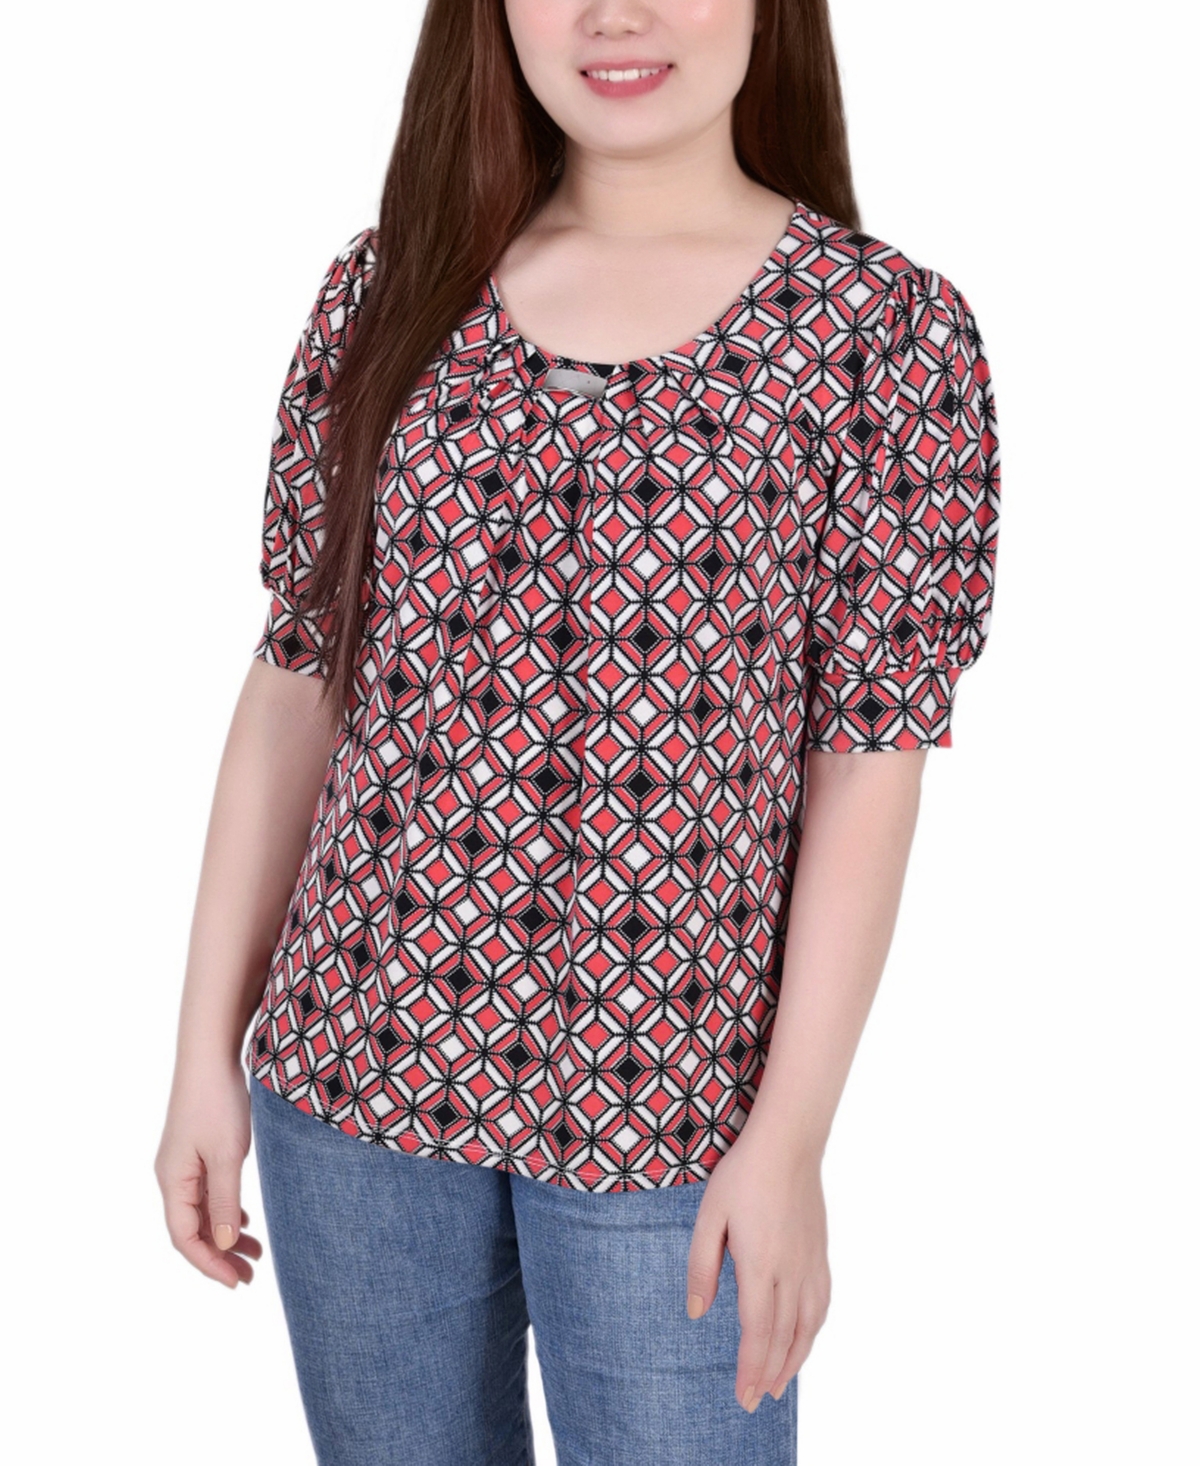 NY COLLECTION PETITE PRINTED BALLOON SLEEVE TOP